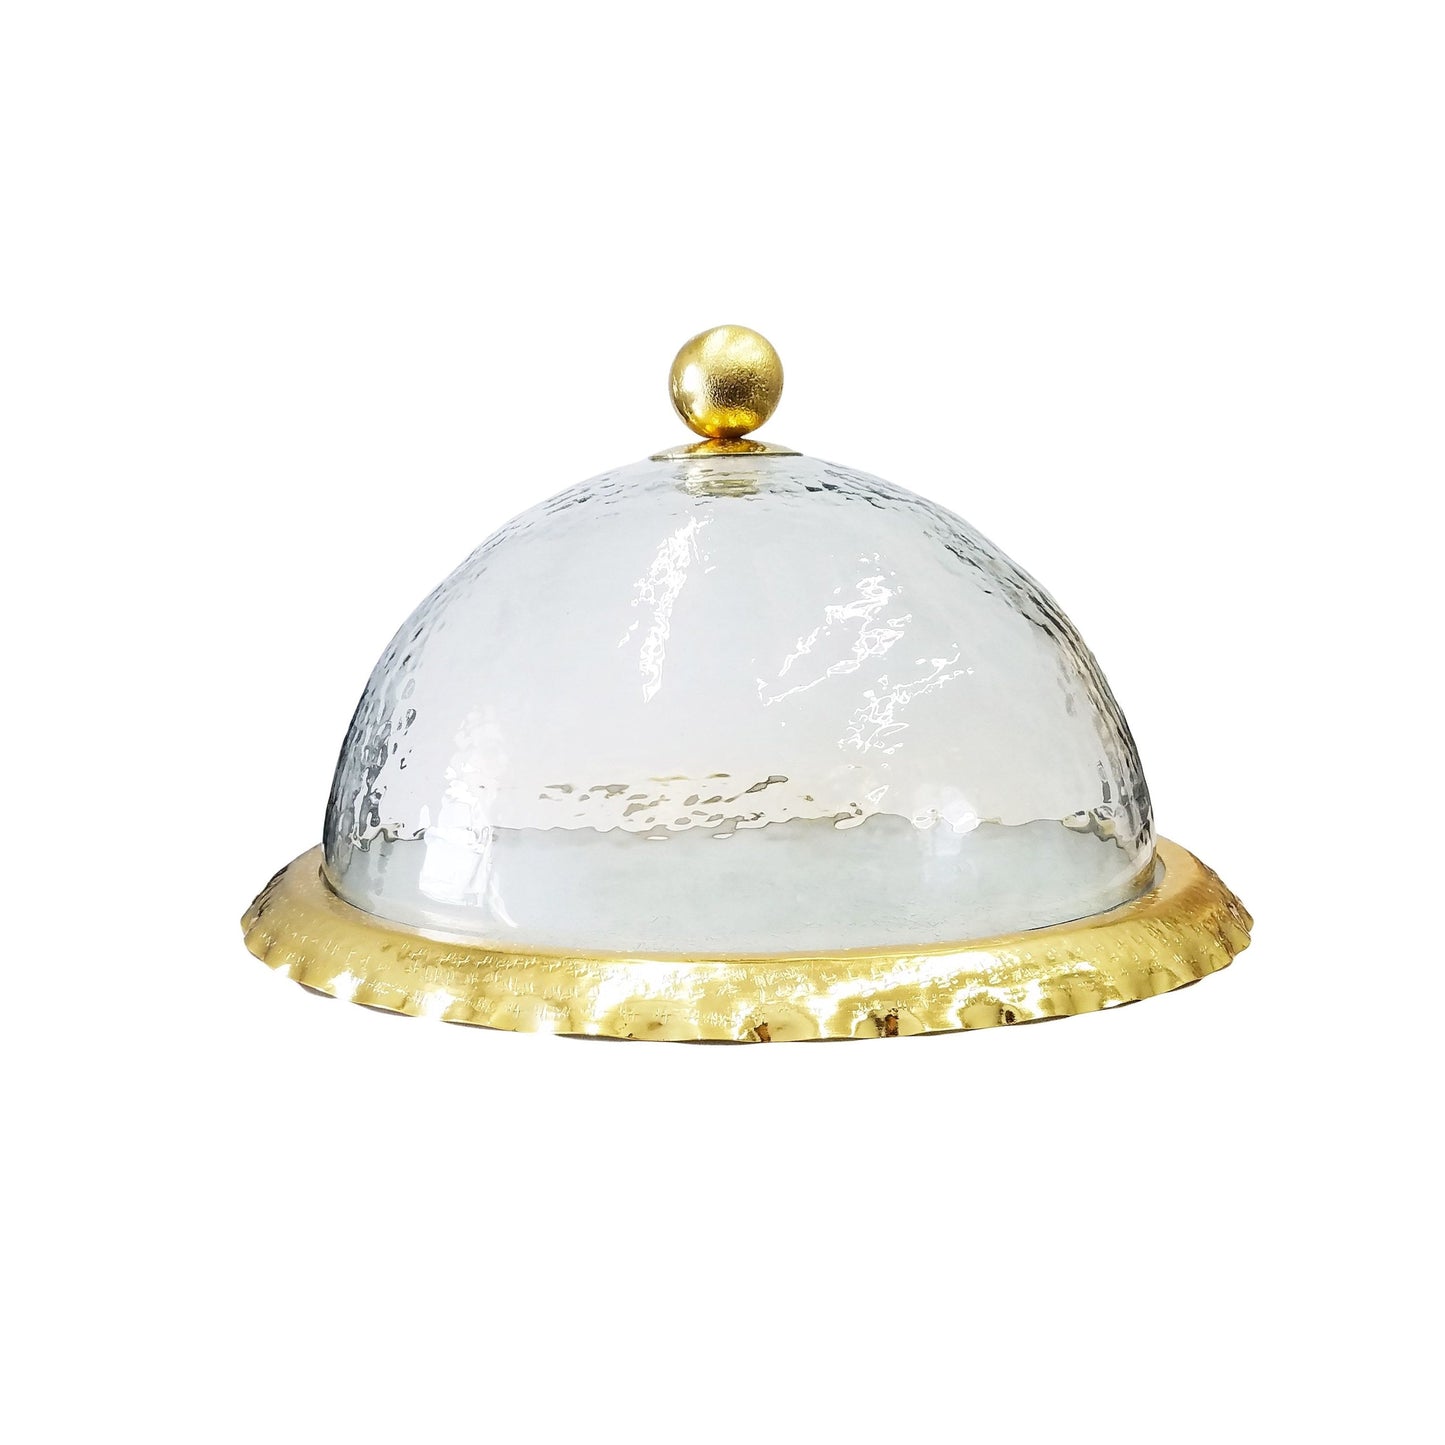 Classic Touch Glass Cake Dome With Gold Border - 13.5"D X 6.25"H